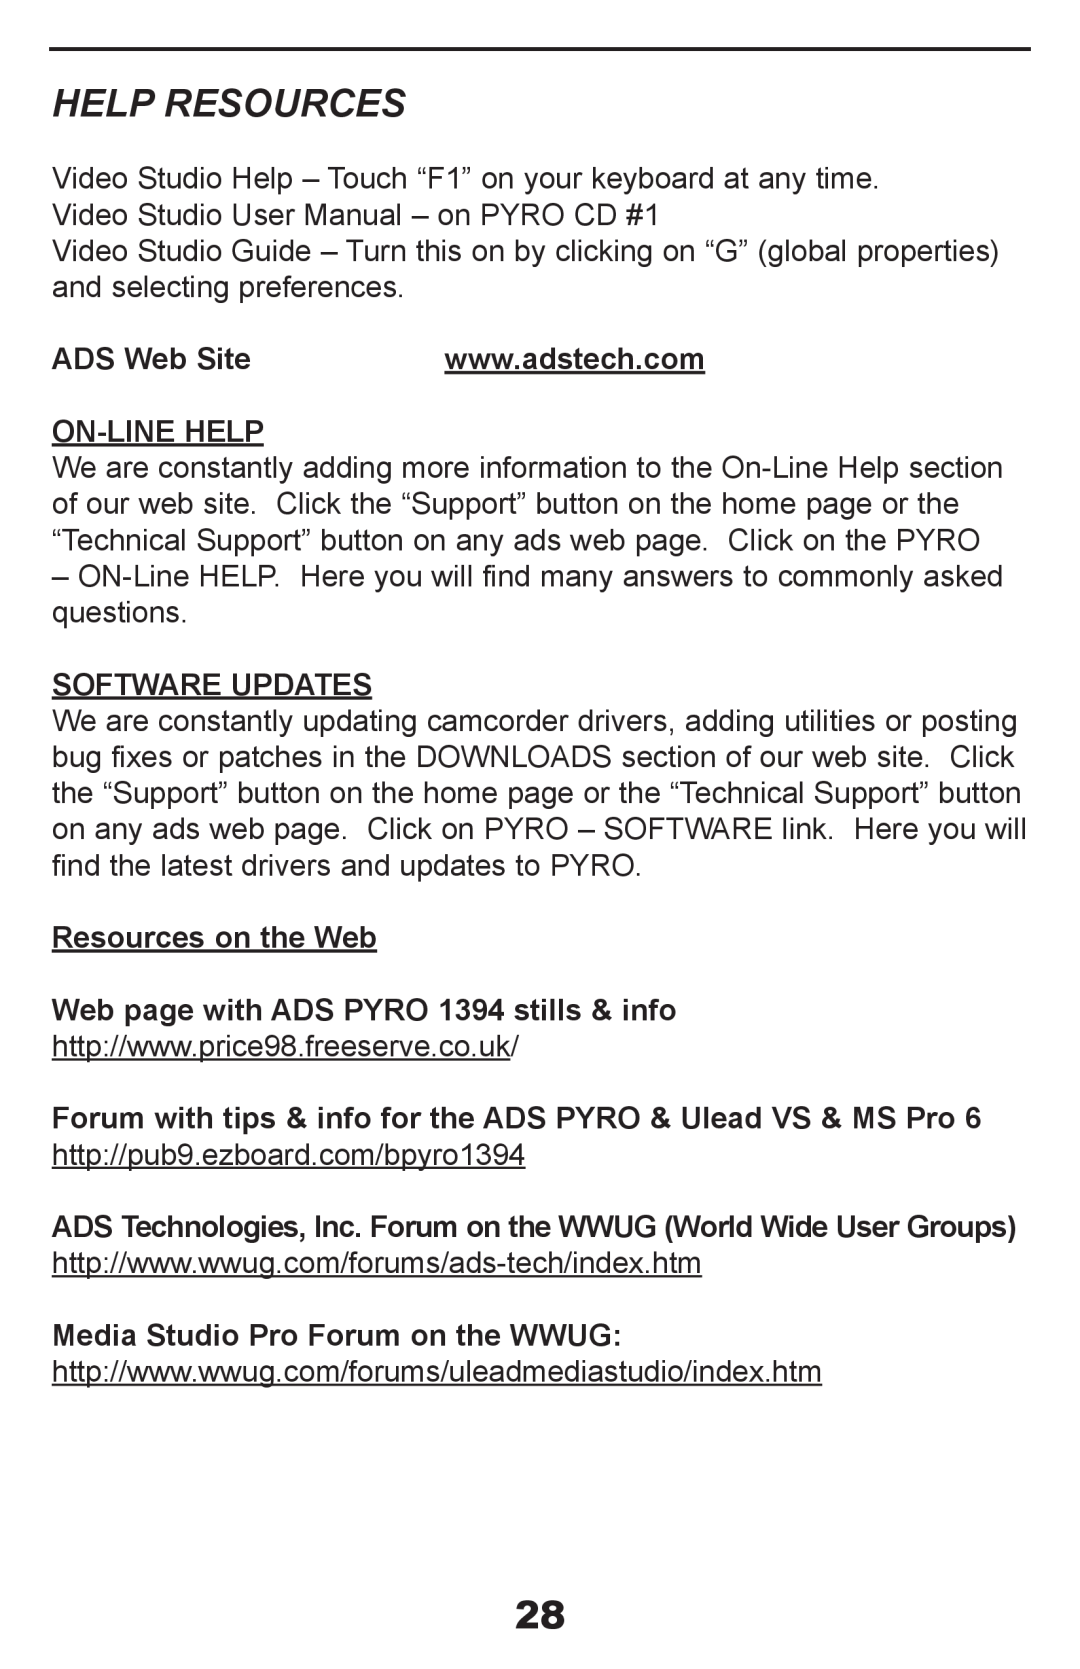 ADS Technologies API-408 Help Resources, ADS Web Site, On-Line Help, Software Updates, Media Studio Pro Forum on the WWUG 